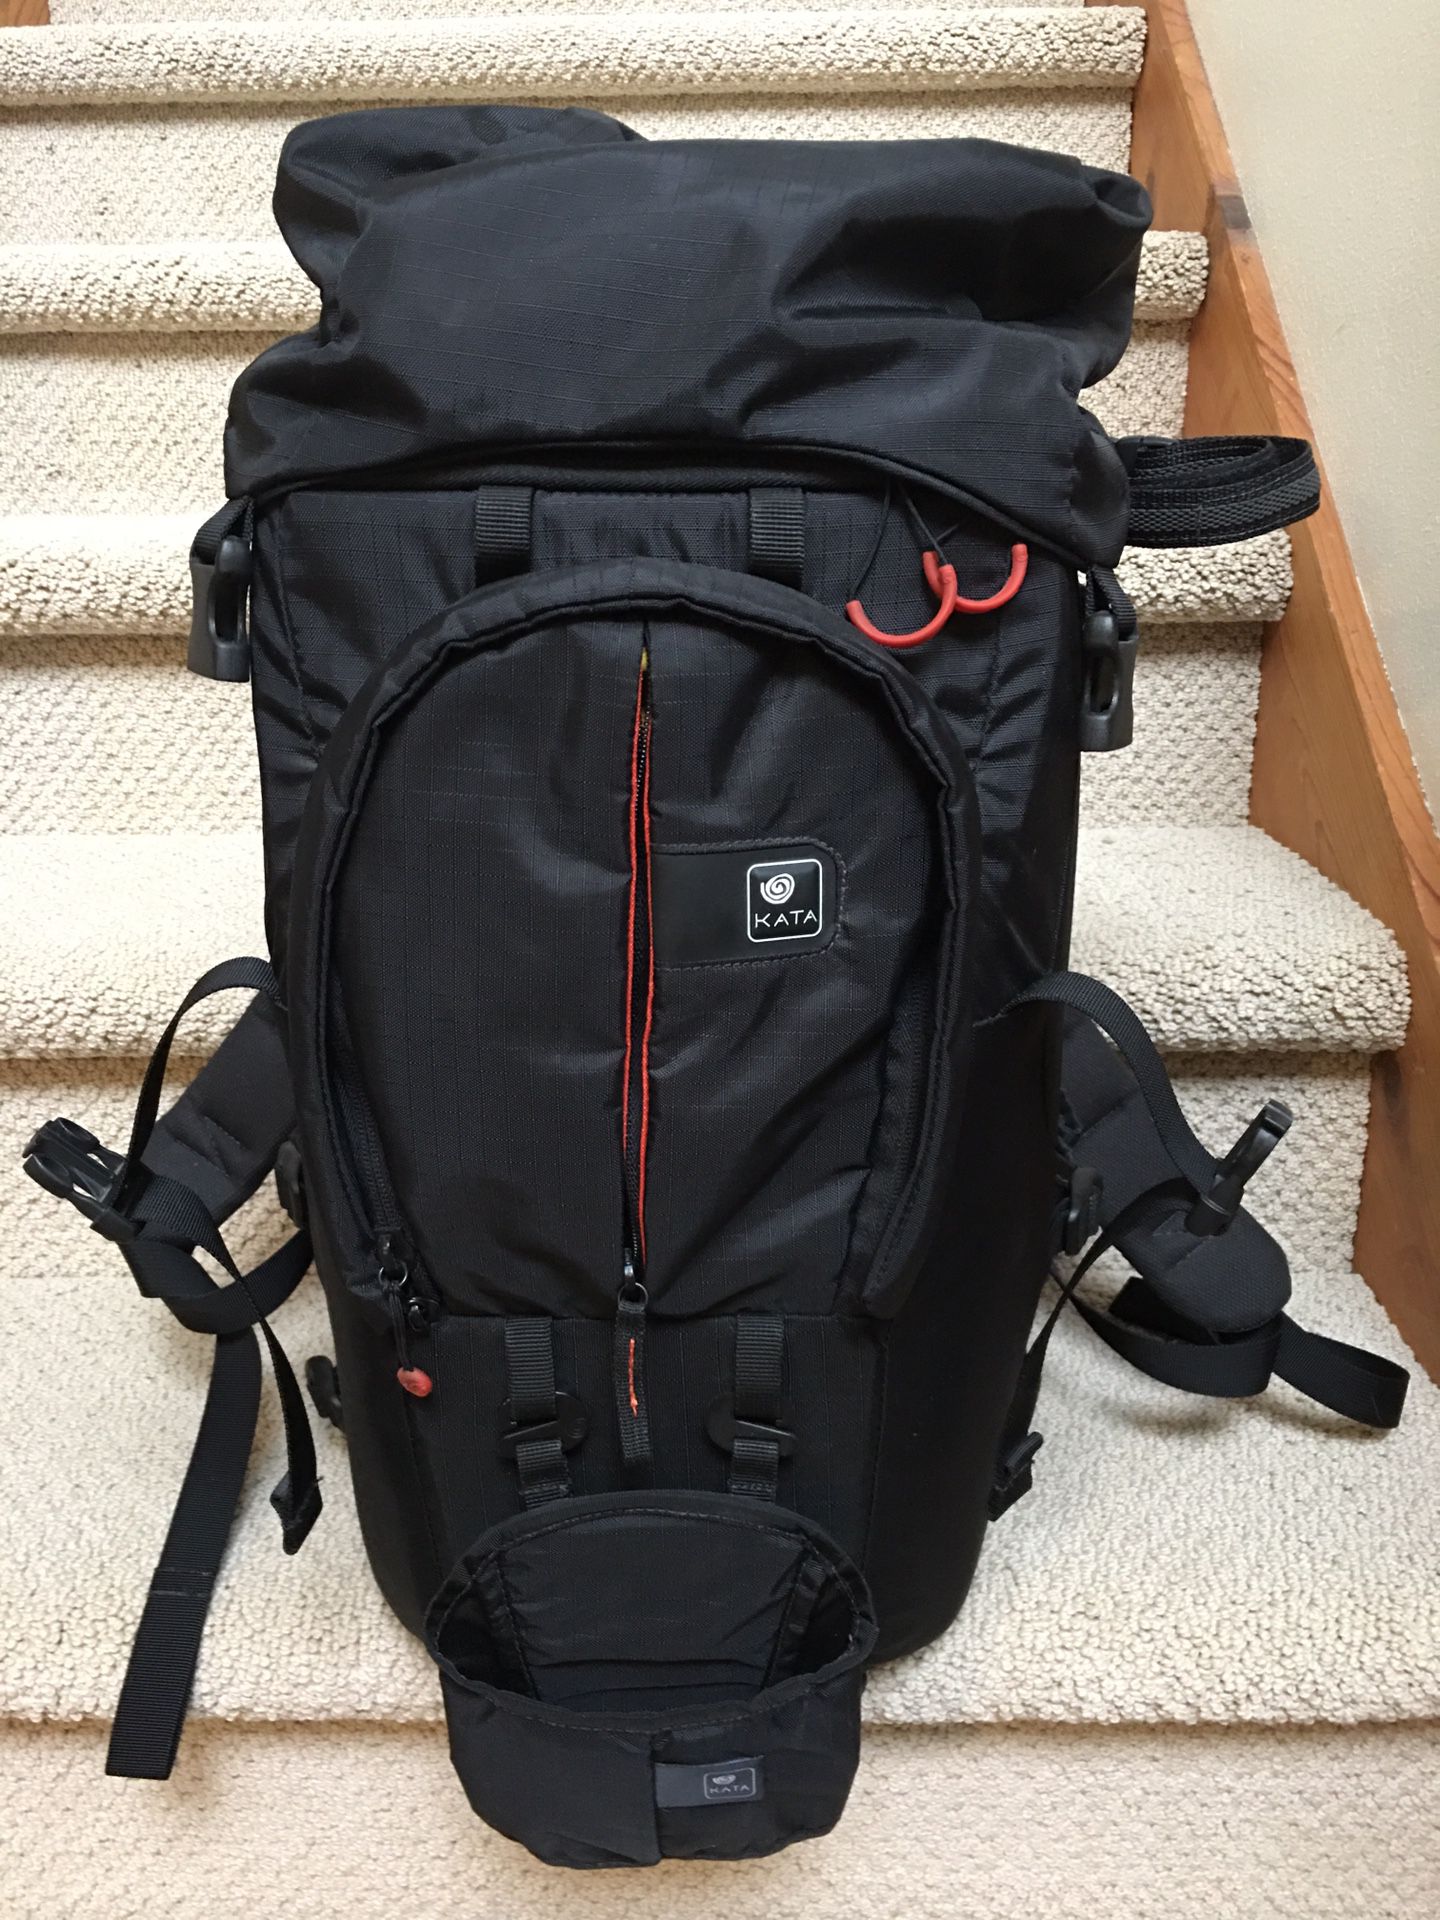 KATA TLB 300 Camera backpack in like new condition